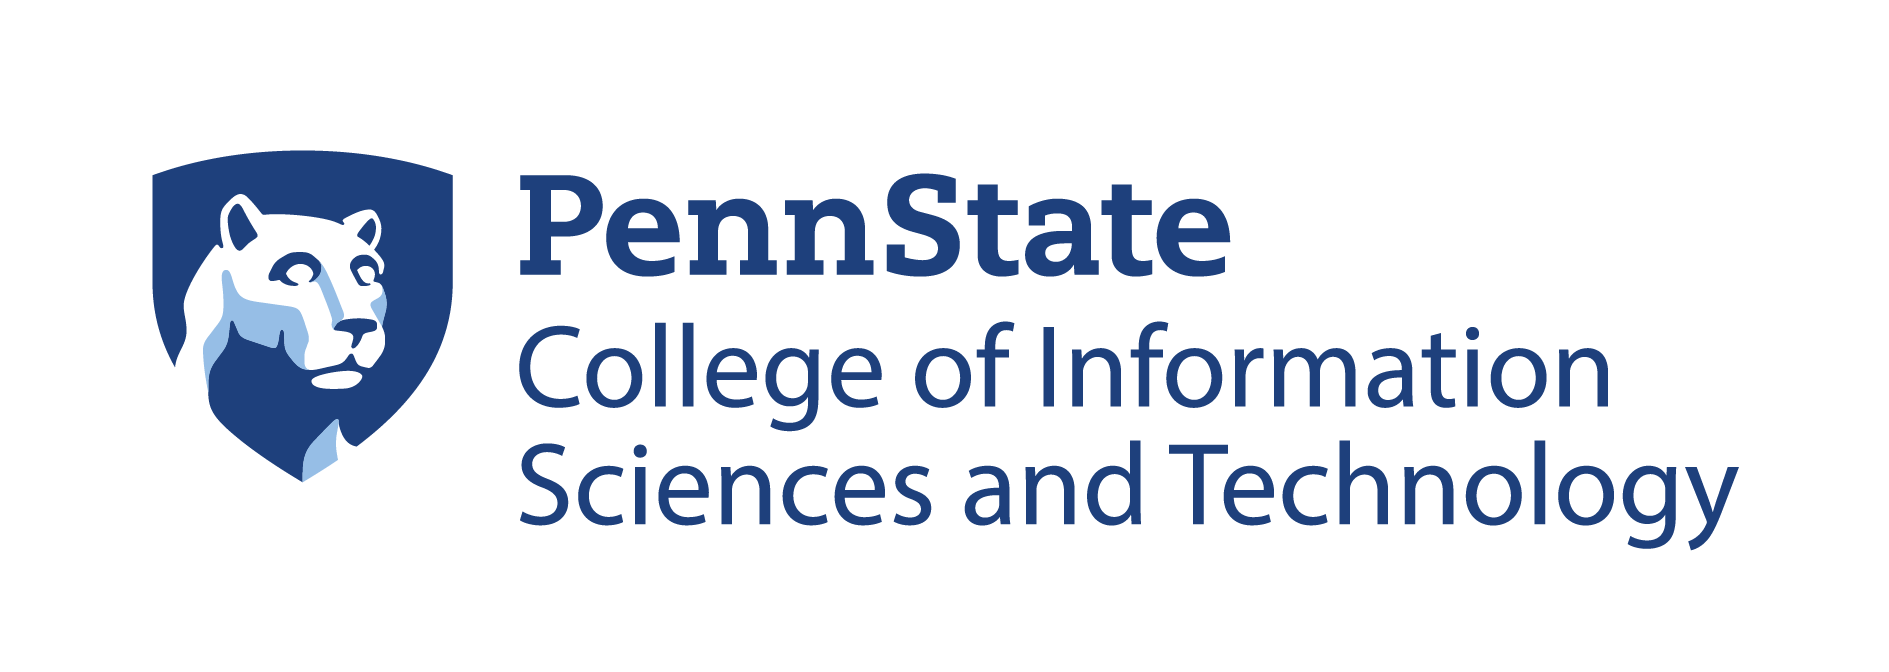 Penn State College of Information Sciences and Technology